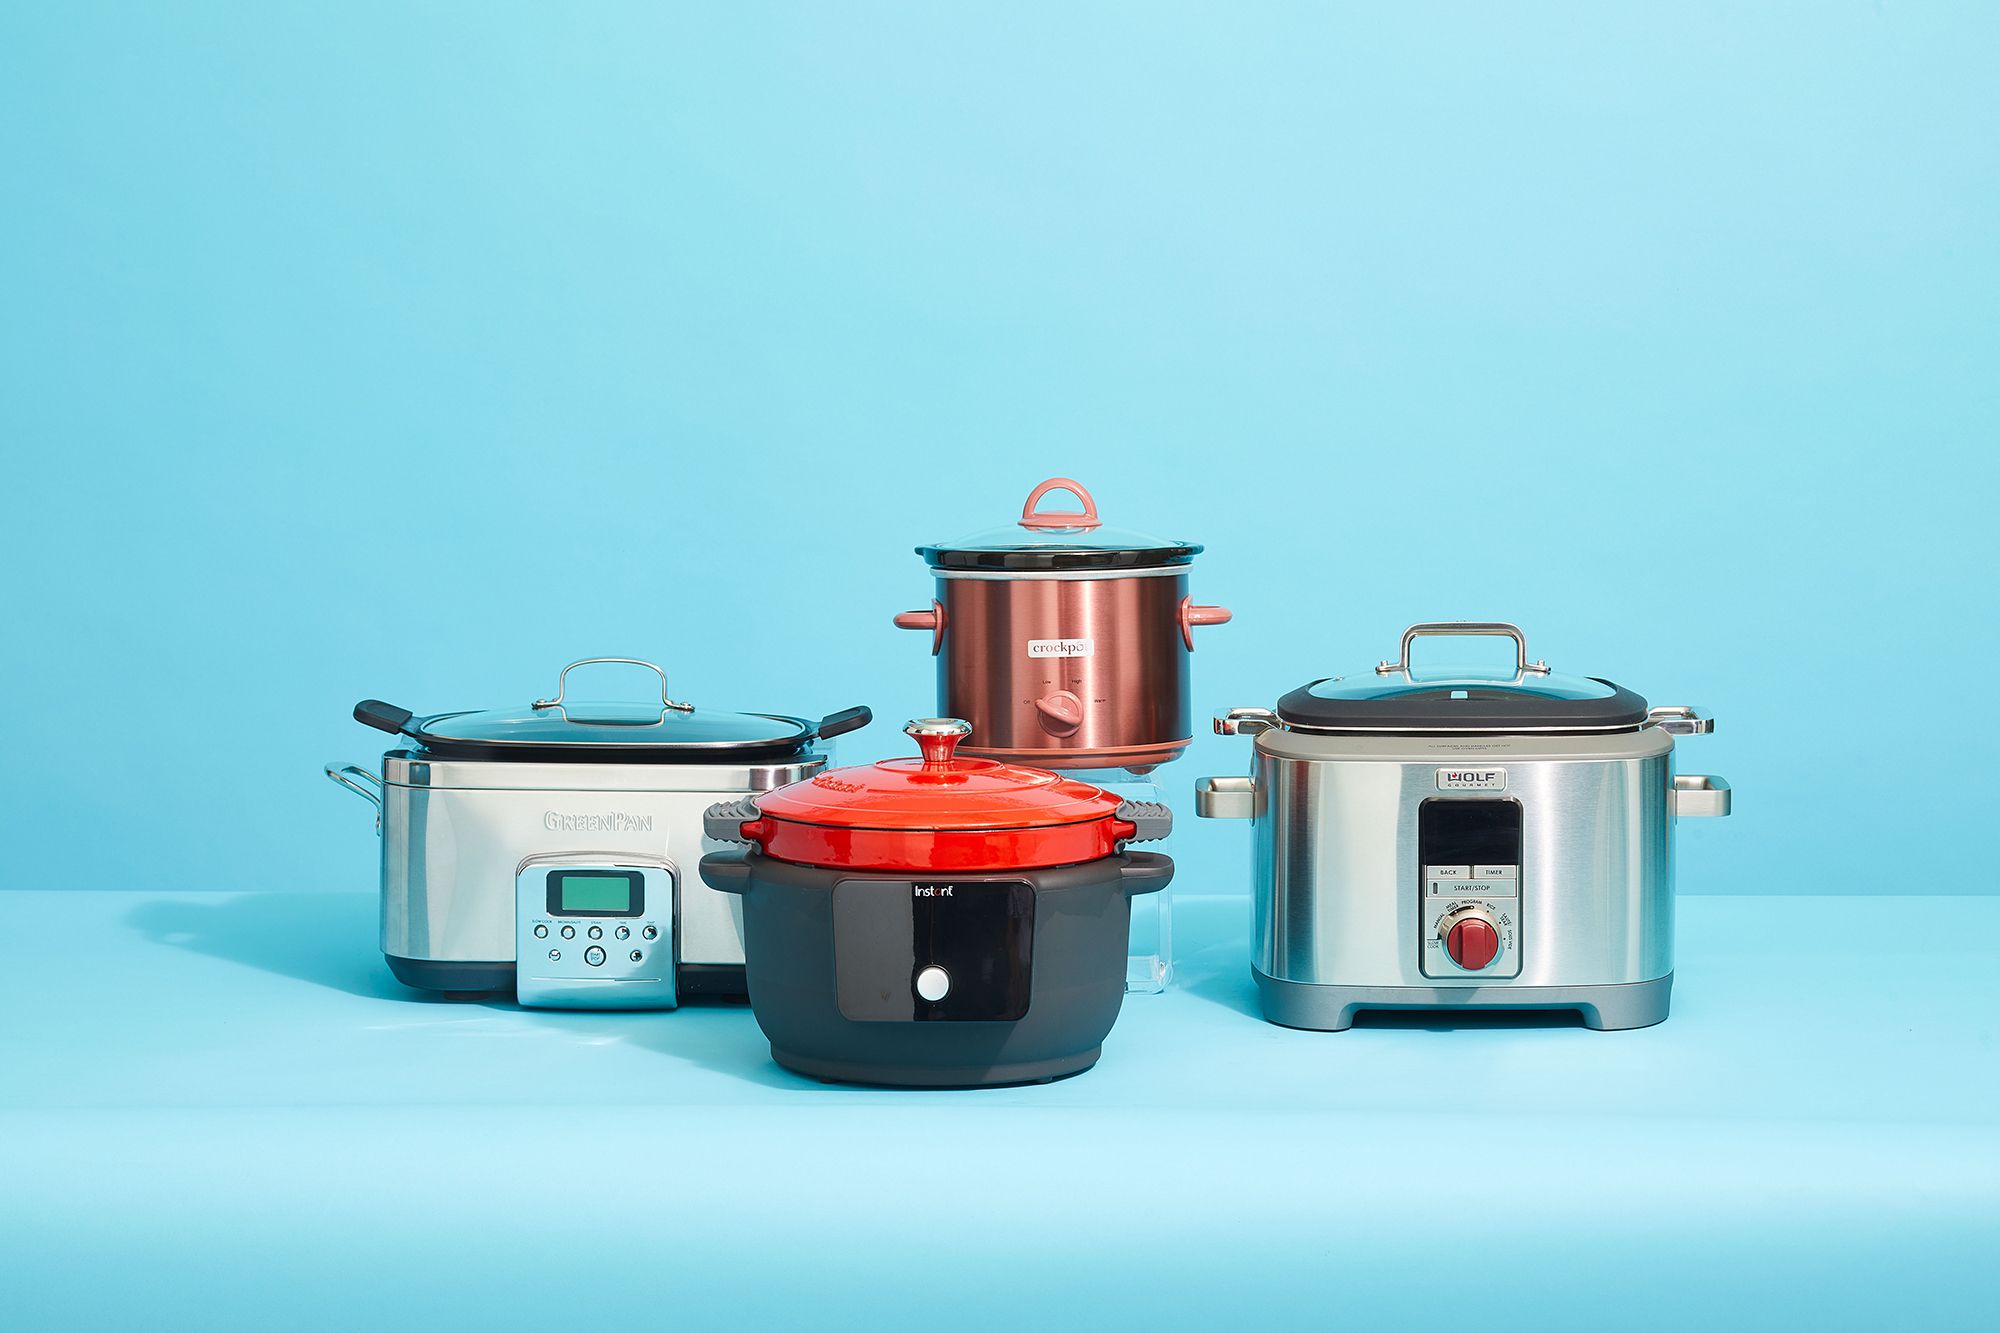 What Is The Largest Size Of An Electric Pressure Cooker